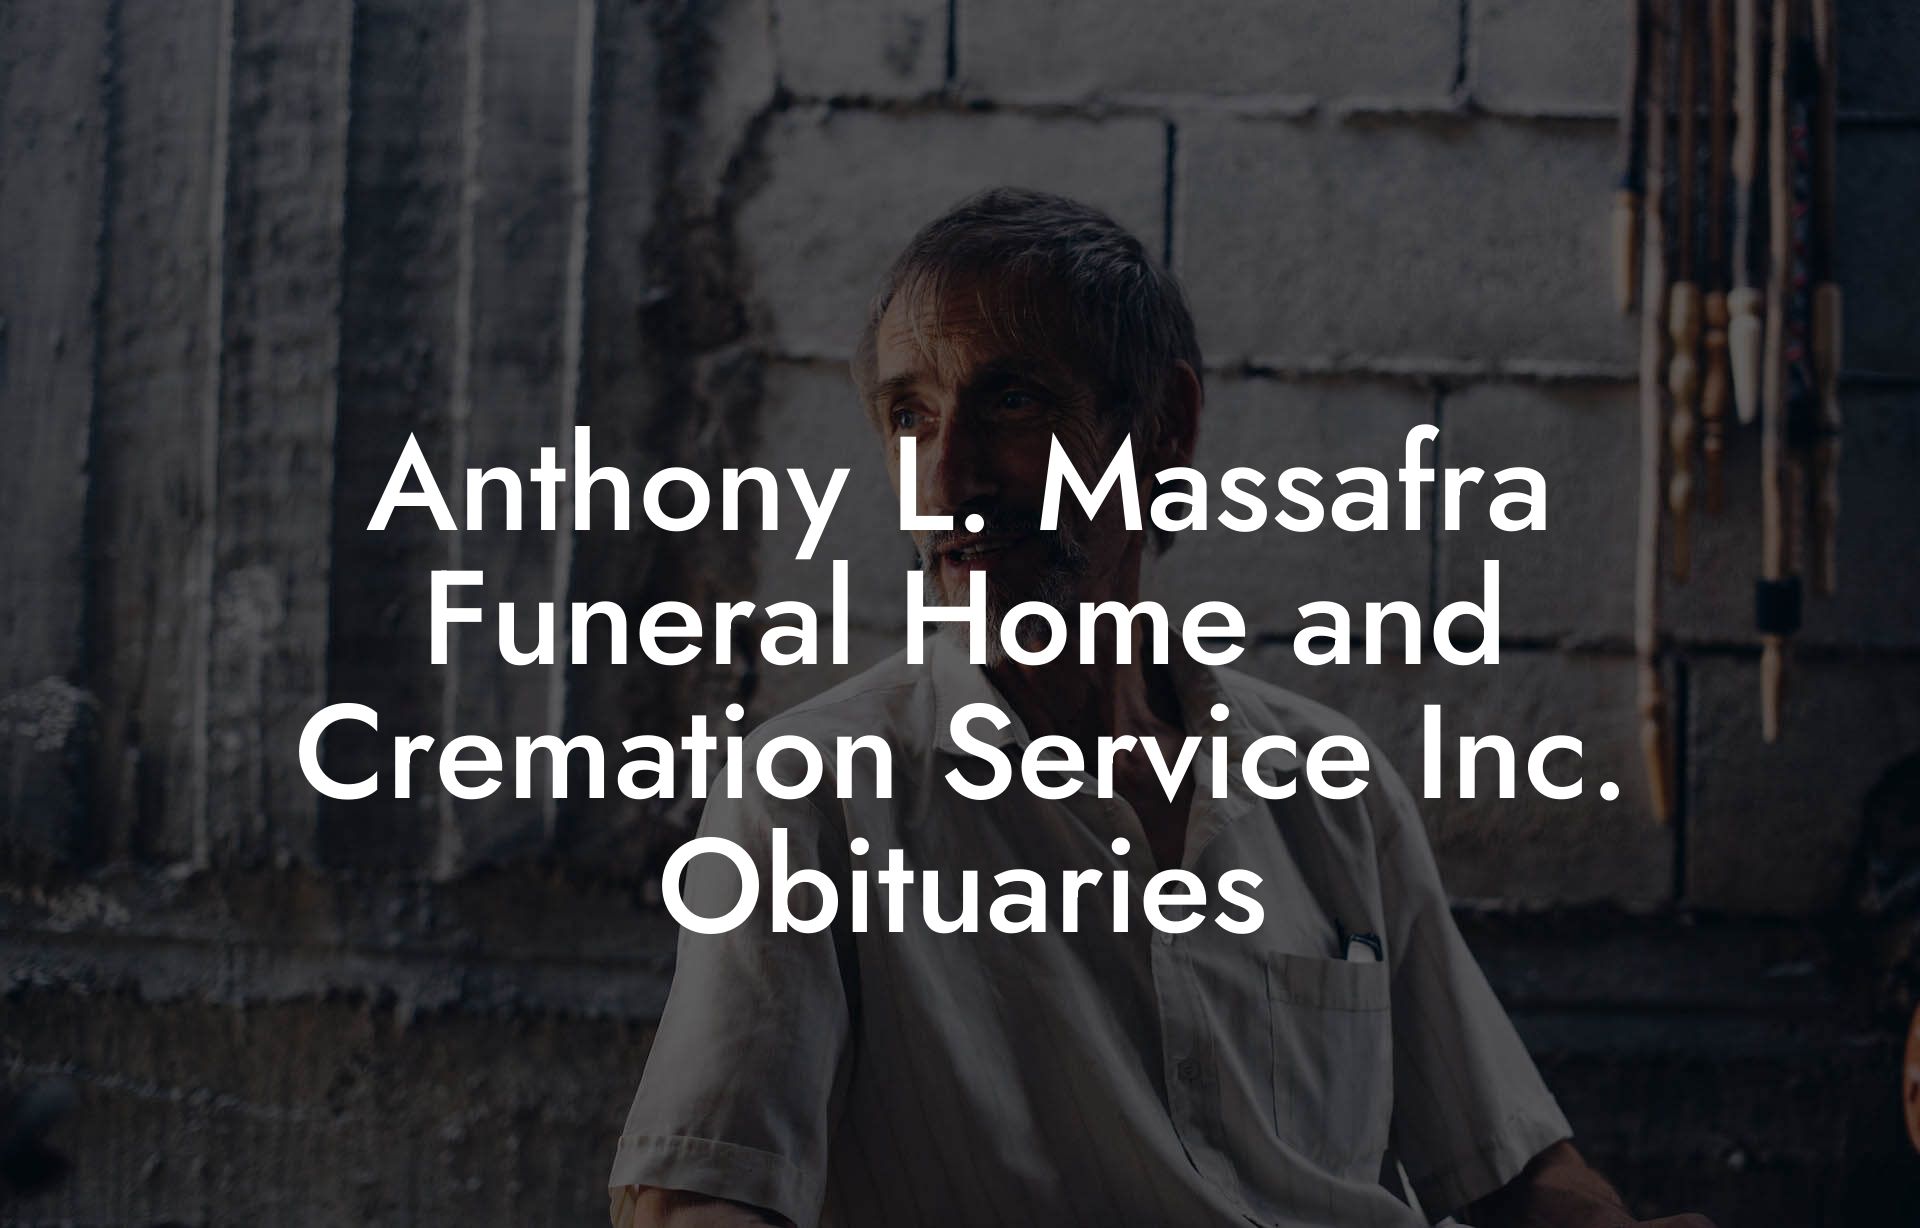 Anthony L. Massafra Funeral Home and Cremation Service Inc. Obituaries